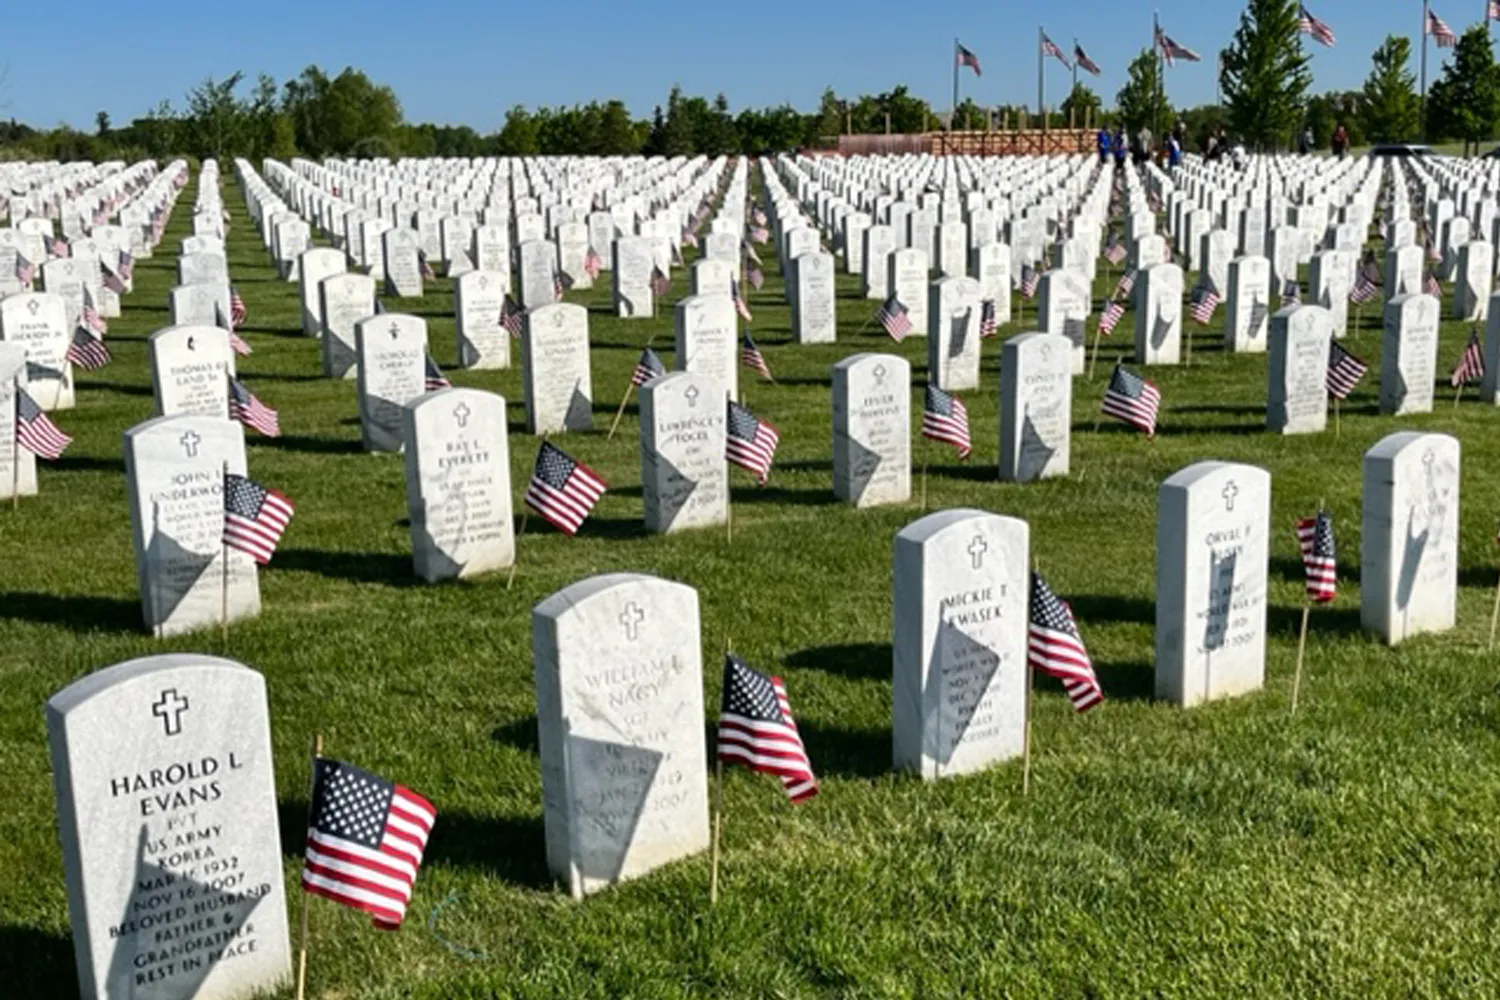 Memorial Day Flag Placement